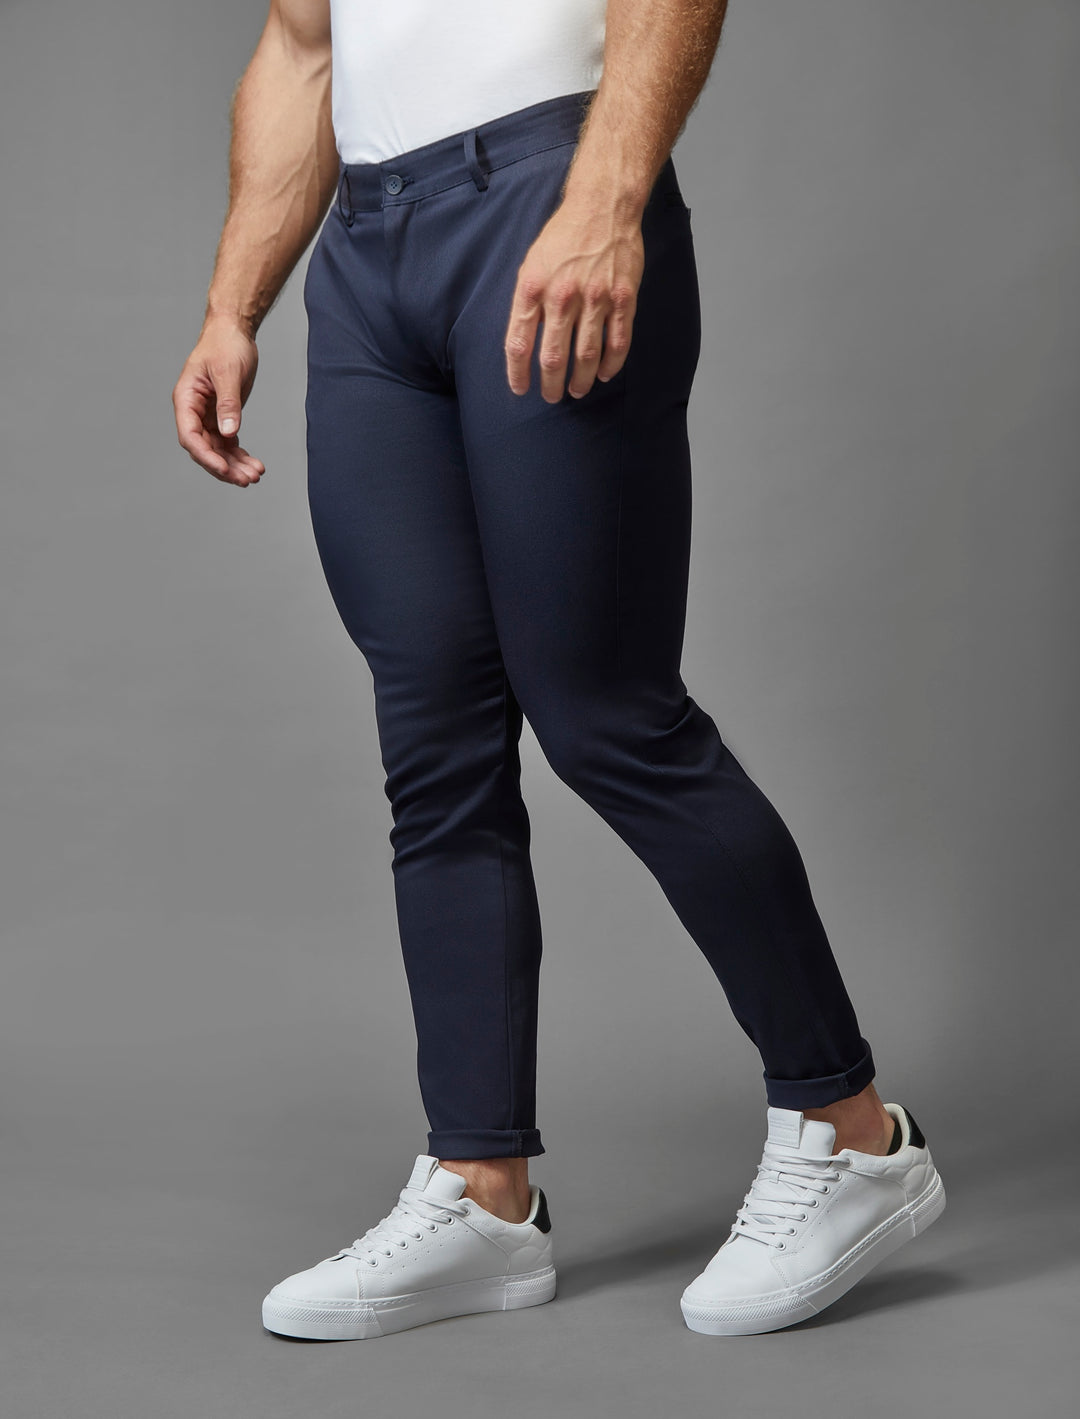 Stretch navy chinos in an athletic fit, a signature piece from Tapered Menswear.